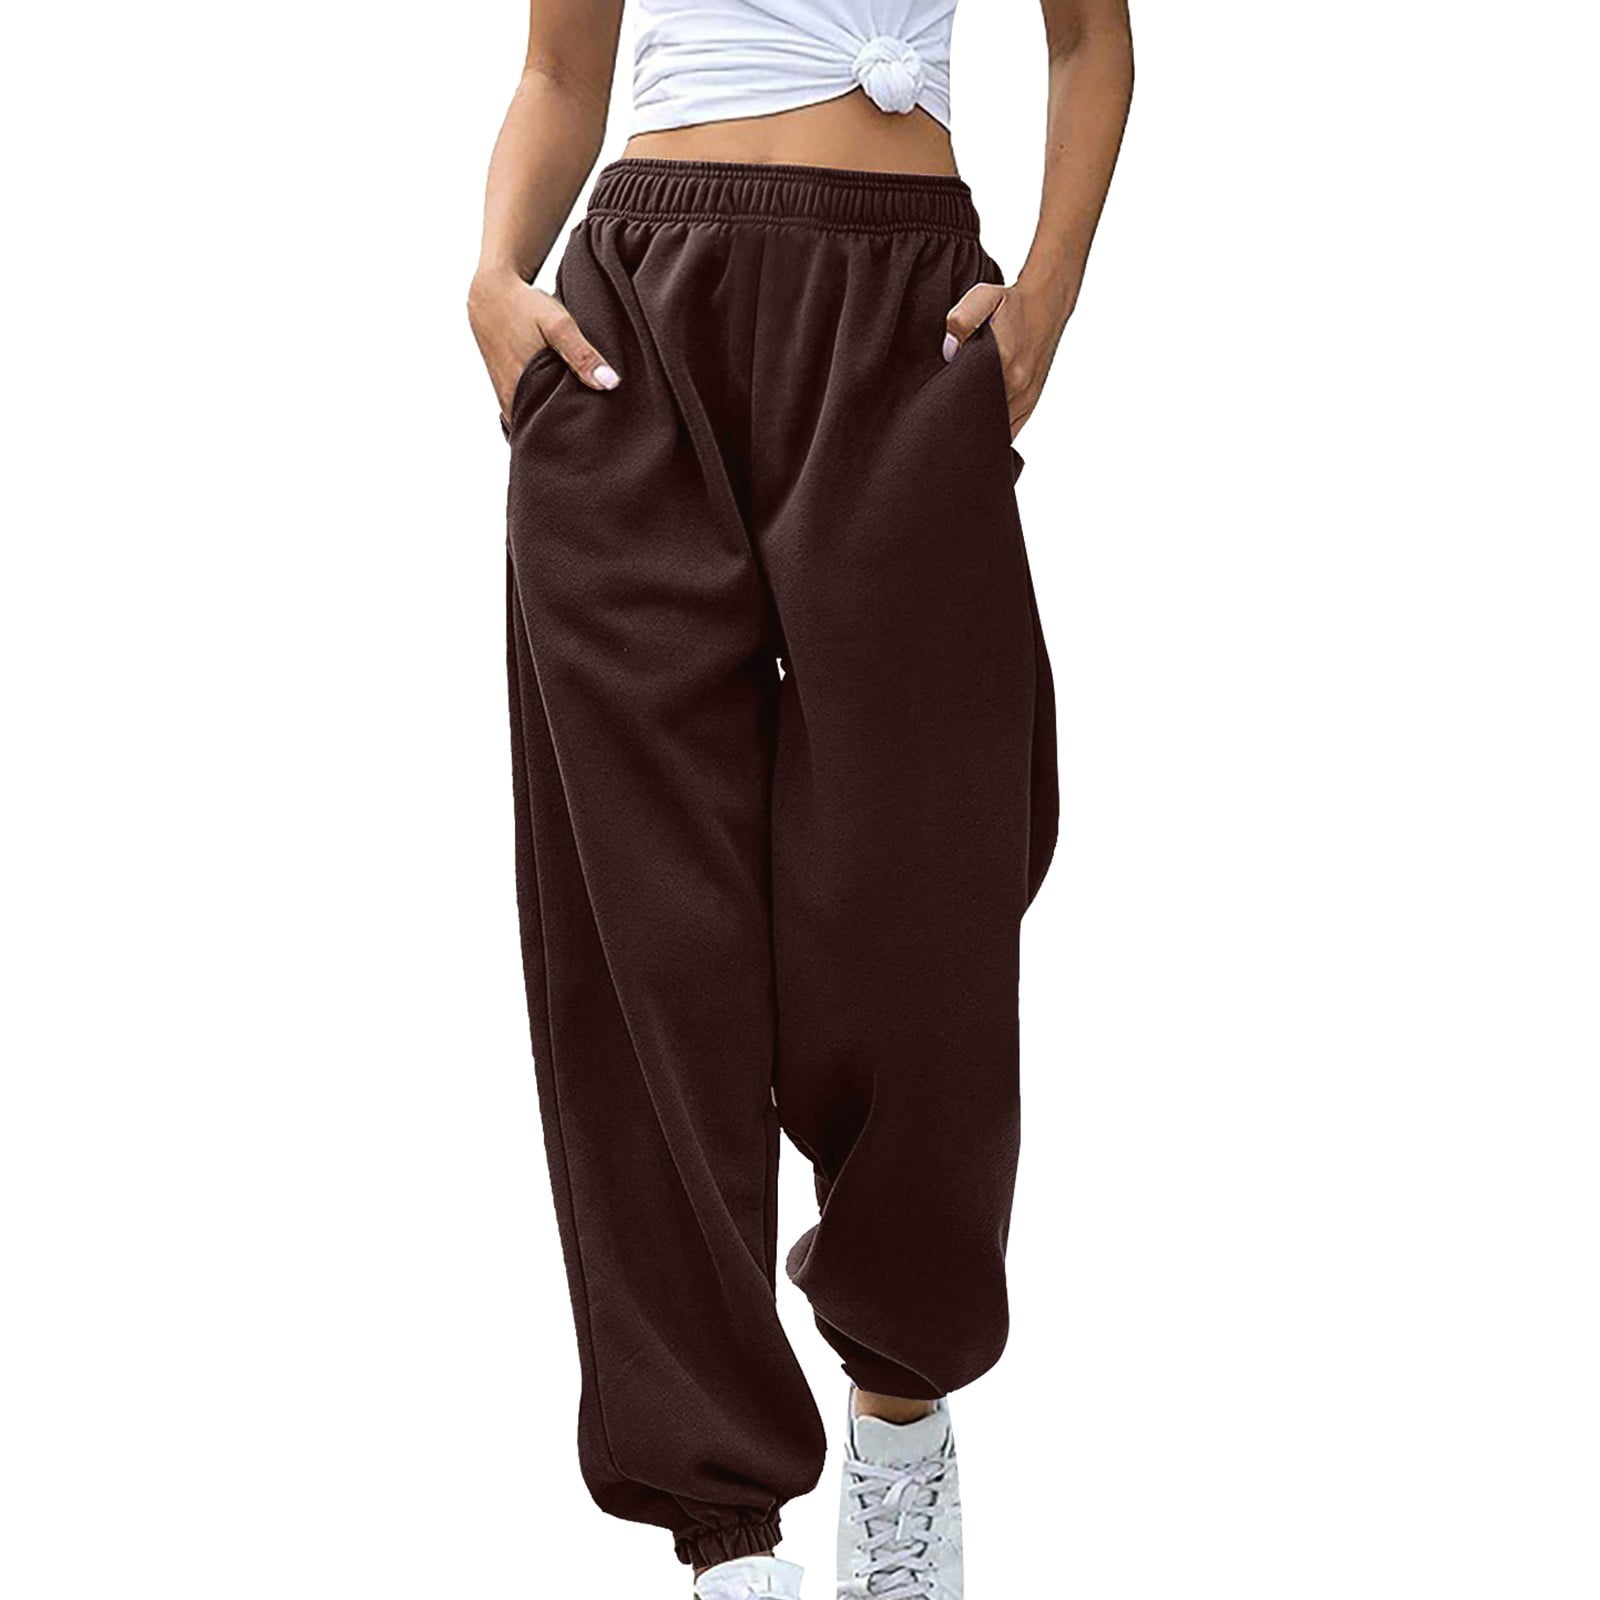  Drawstring Workout Pants Women Palazzo Sweat Pants Active with  Pockets Baggy Sweatpants Loose Comfy Lounge Jogger Gym : Sports & Outdoors